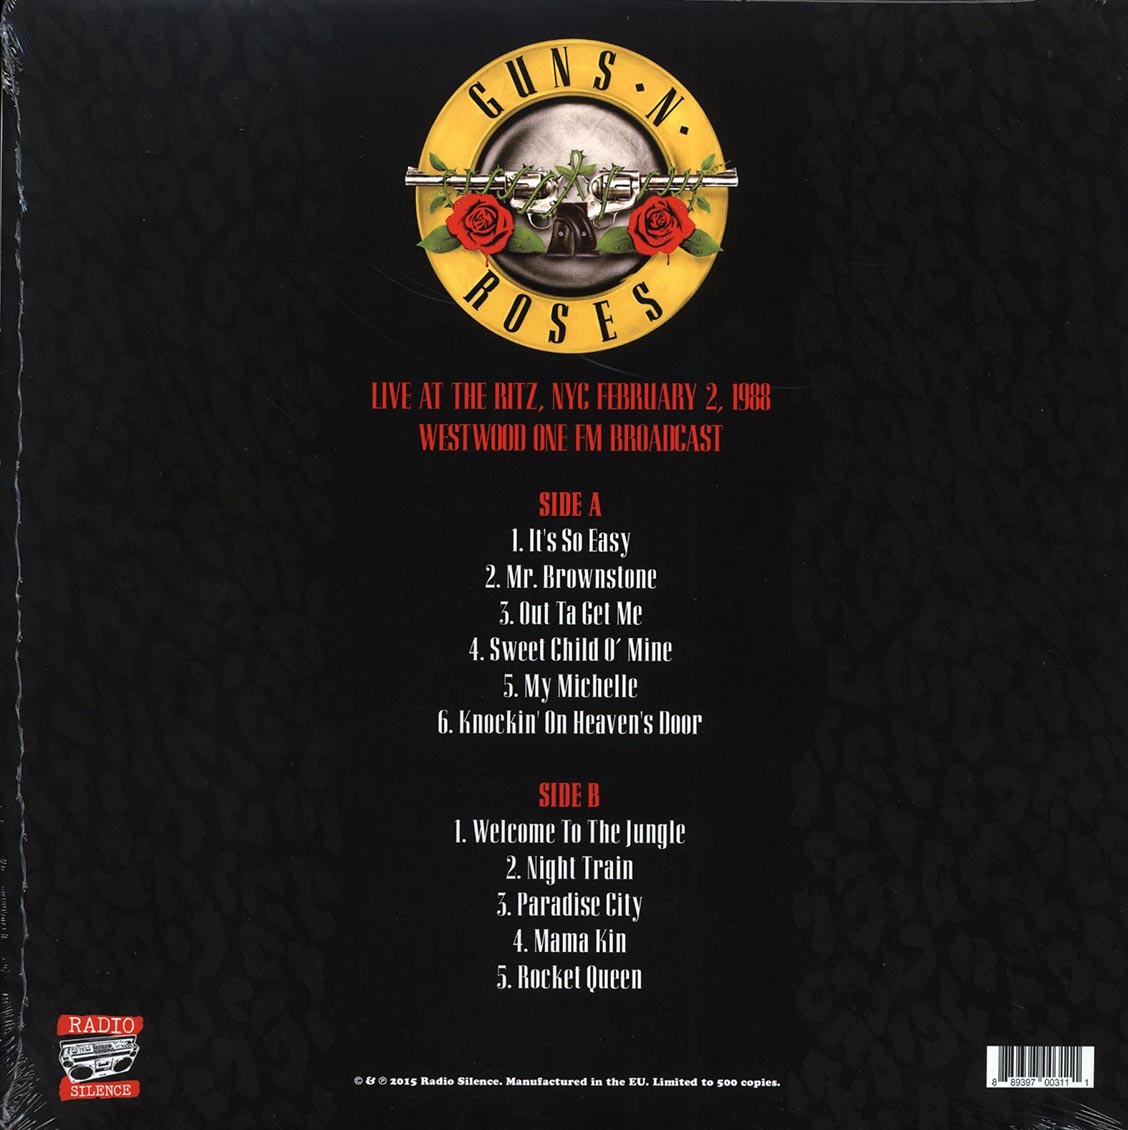 Guns N' Roses - Live At The Ritz, NYC, February 2, 1988: Westwood One FM  Broadcast (Radio Silence) (Ltd. 500 Copies)